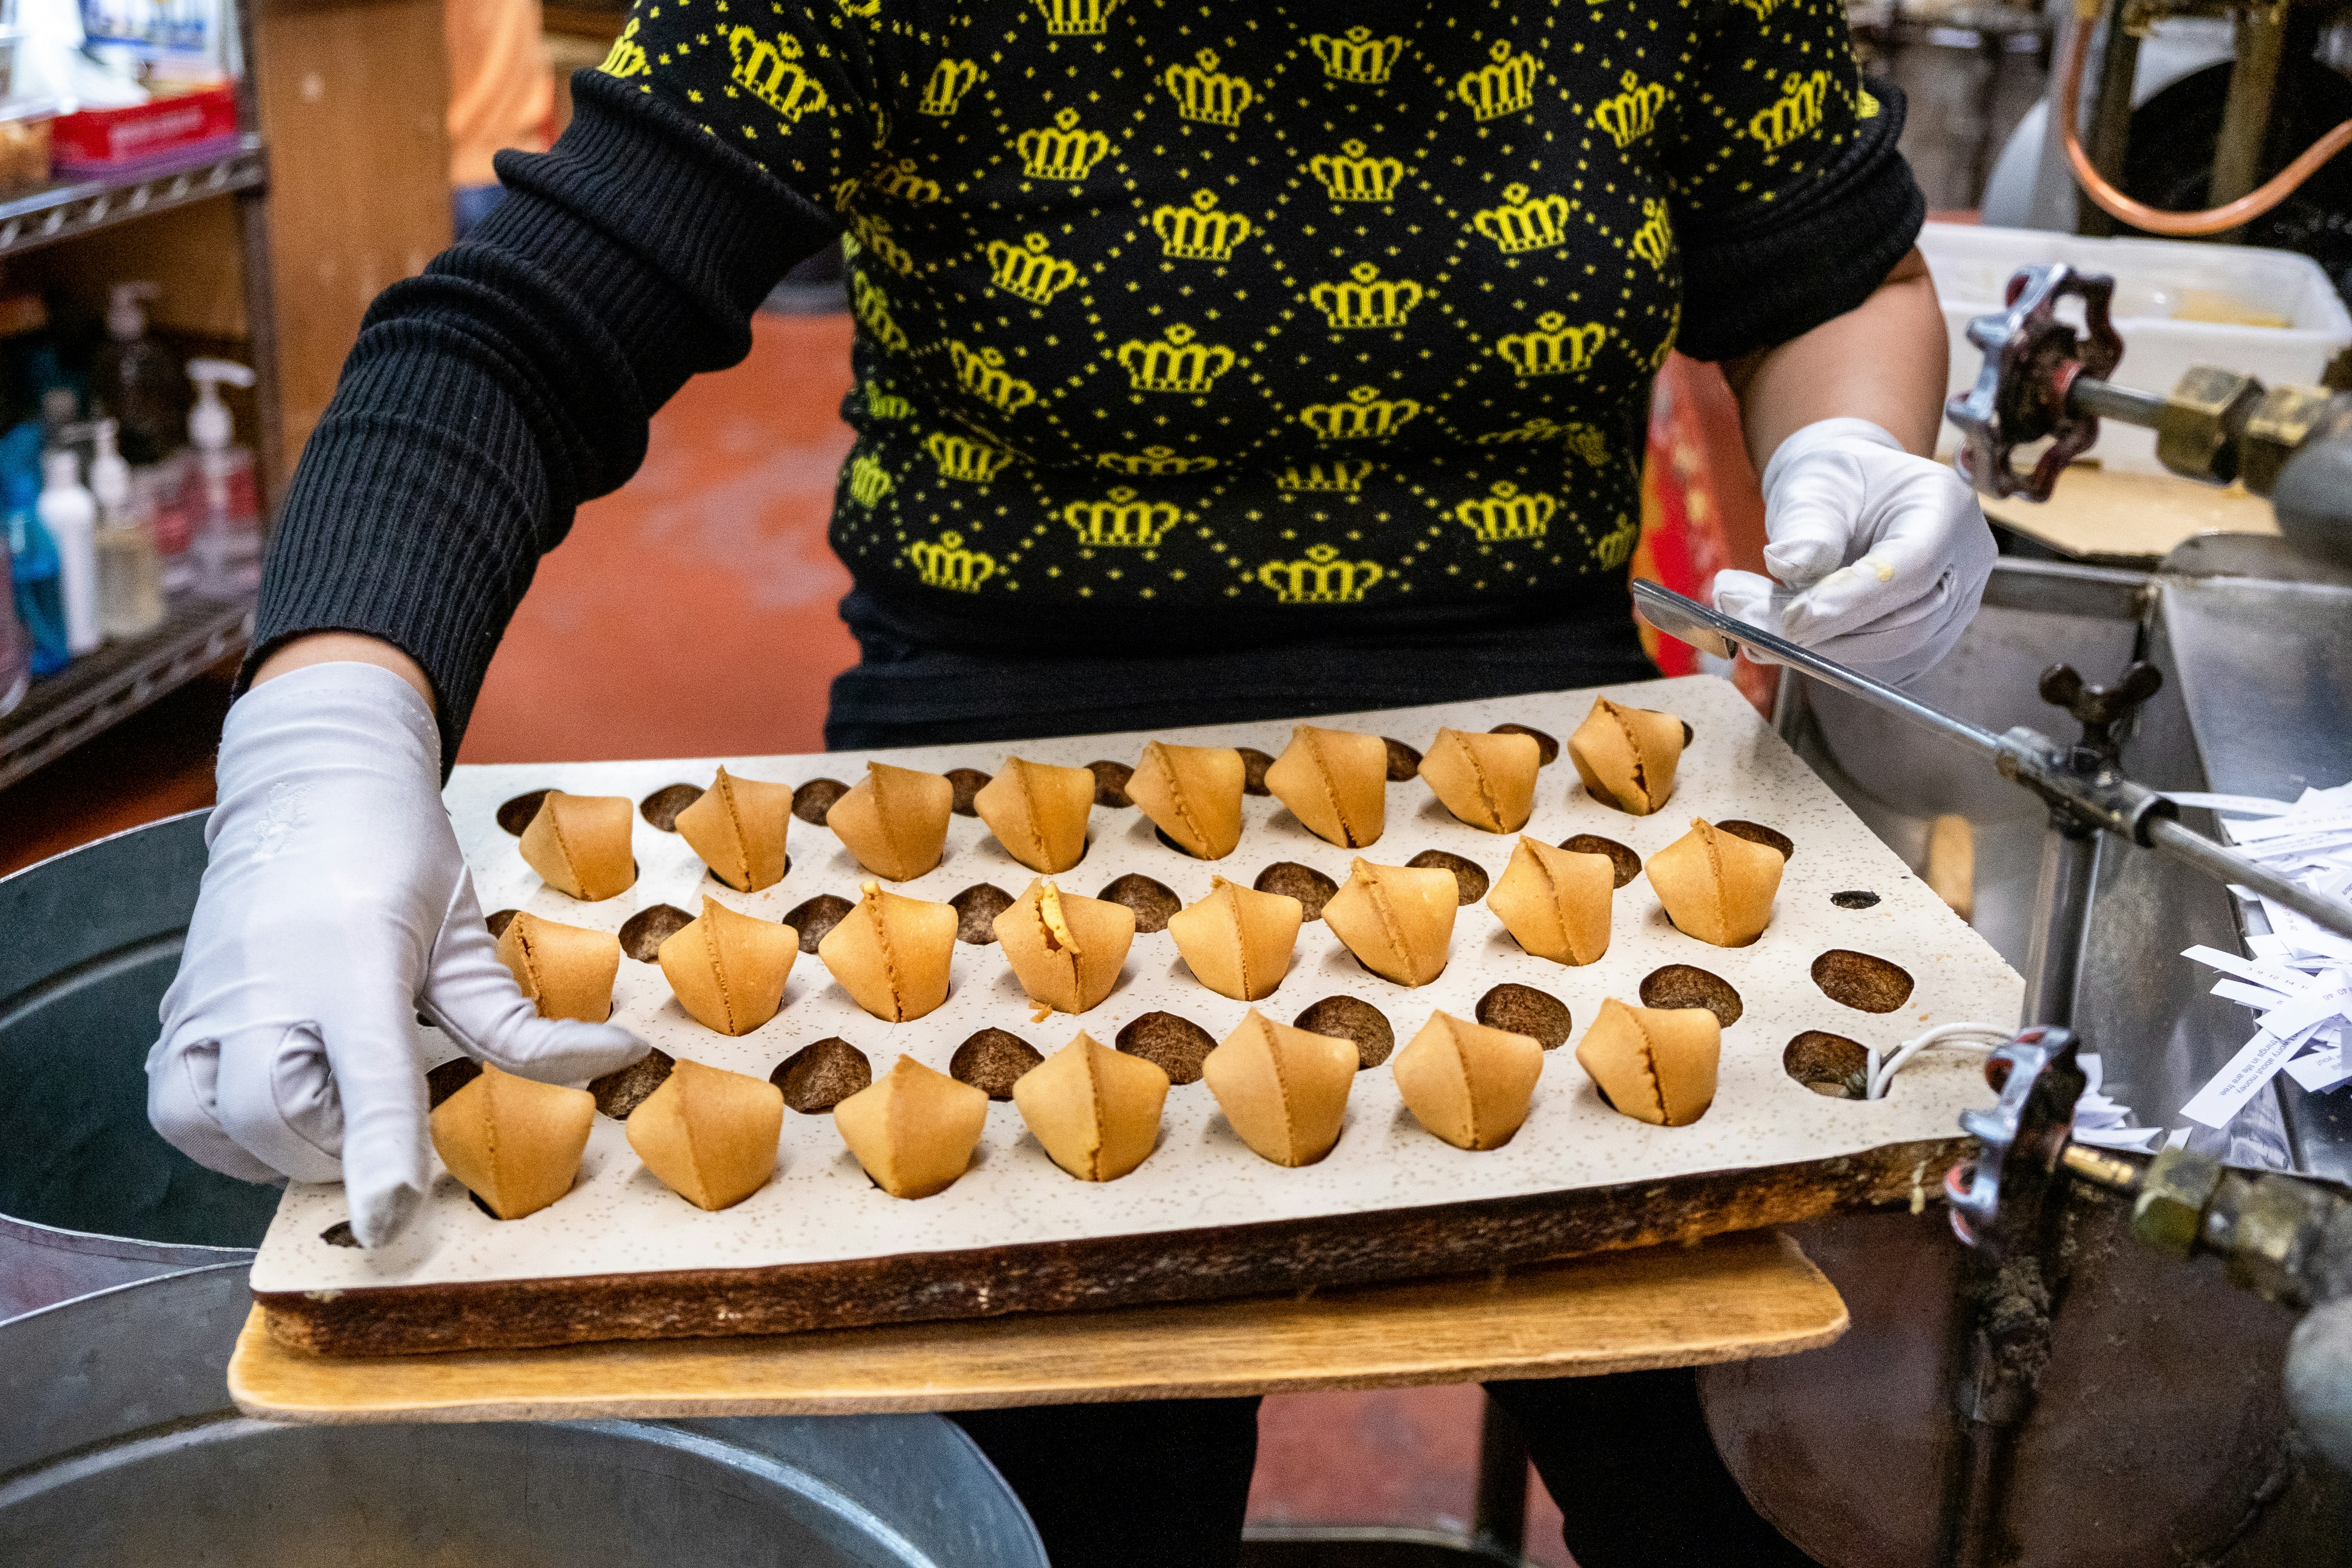 Staff member holding a tray of fortune cookies